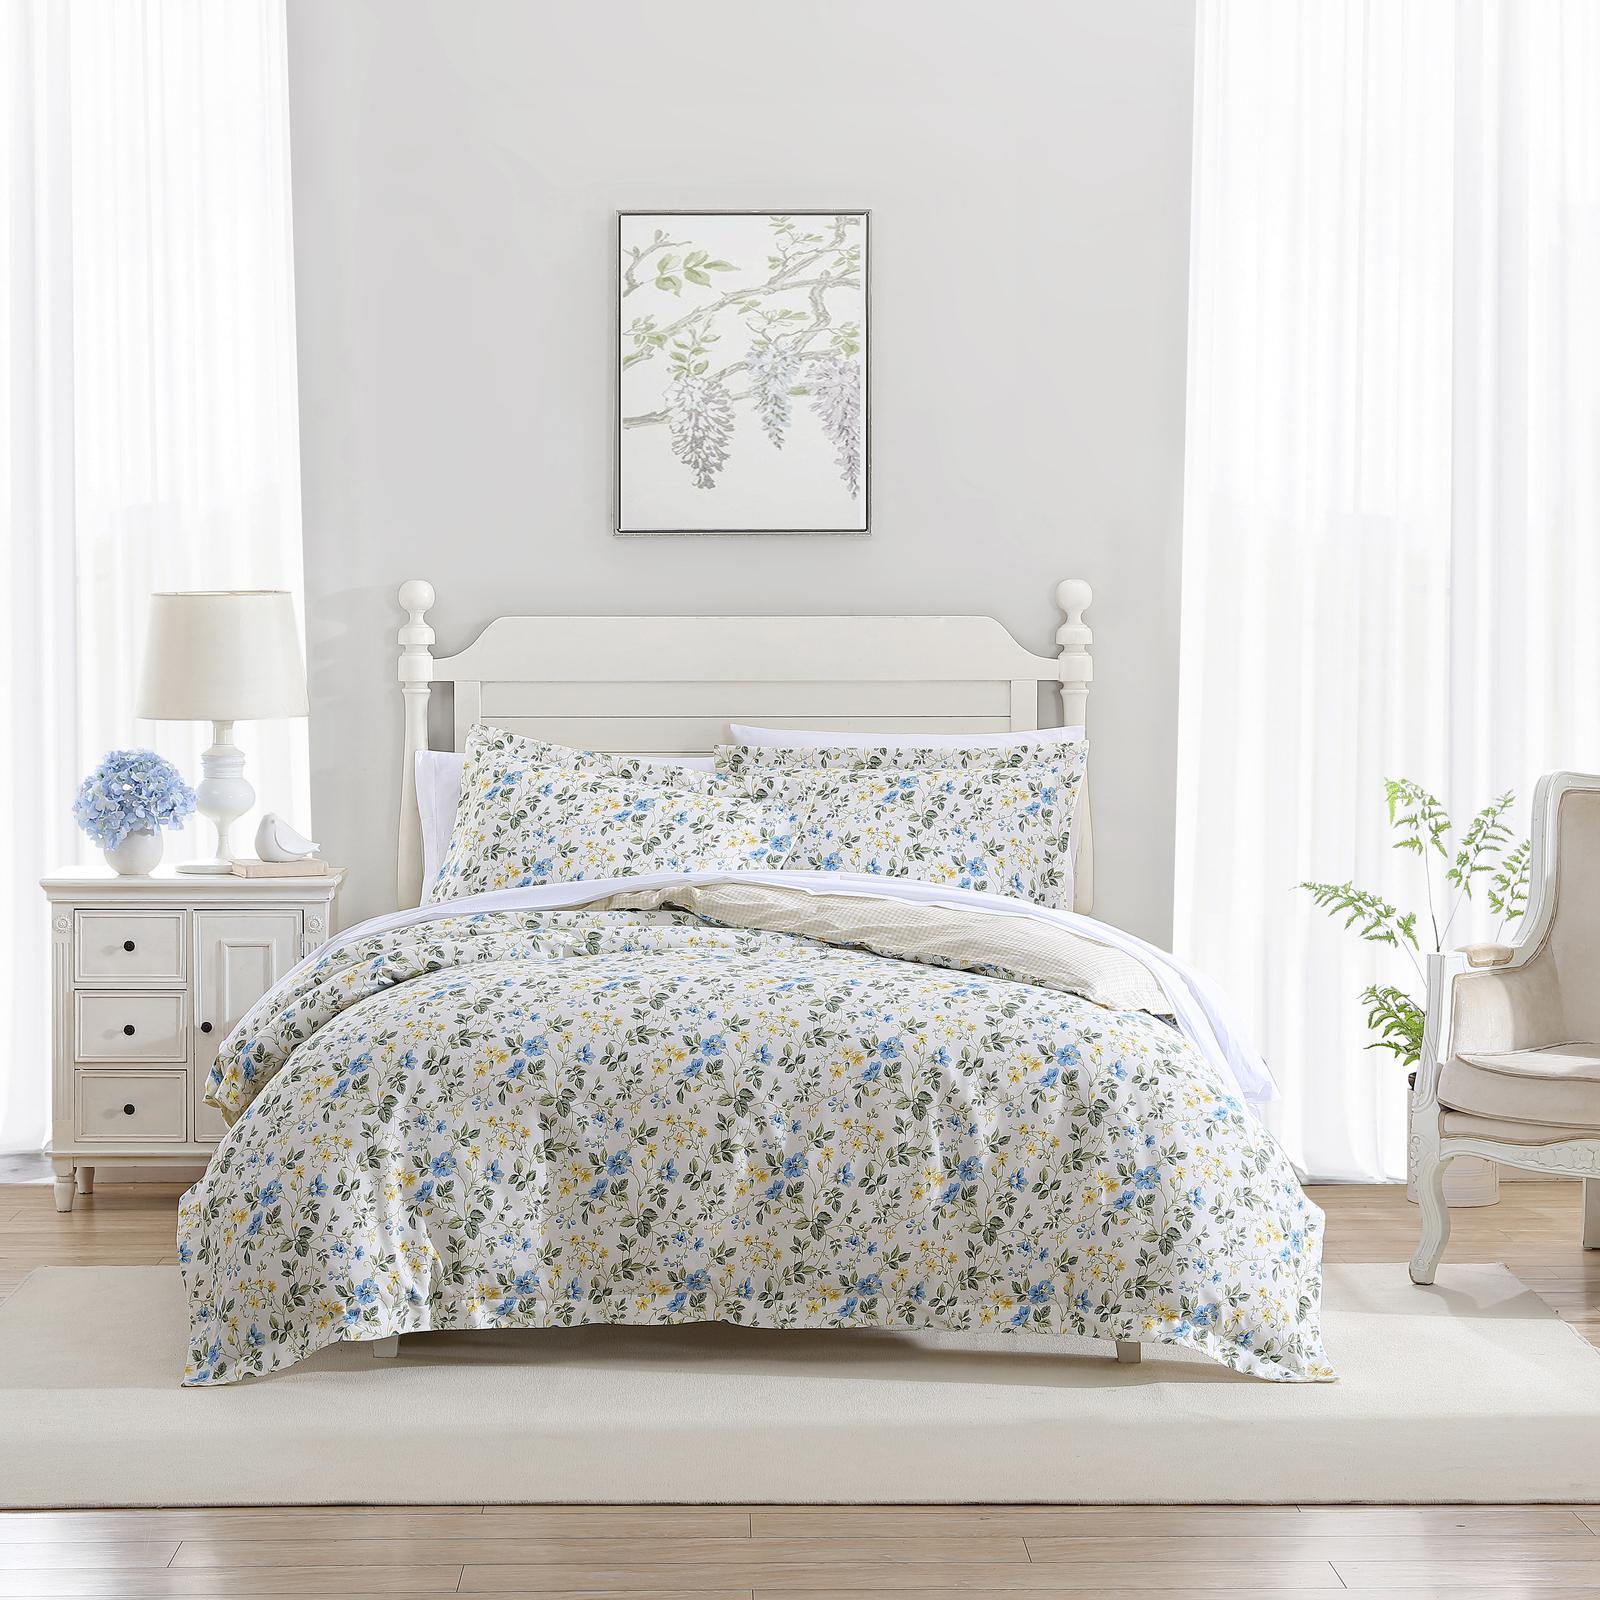 Laura Ashley Meadow Floral Single Bed Quilt Cover Set w/ Pillowcase Sun Blue